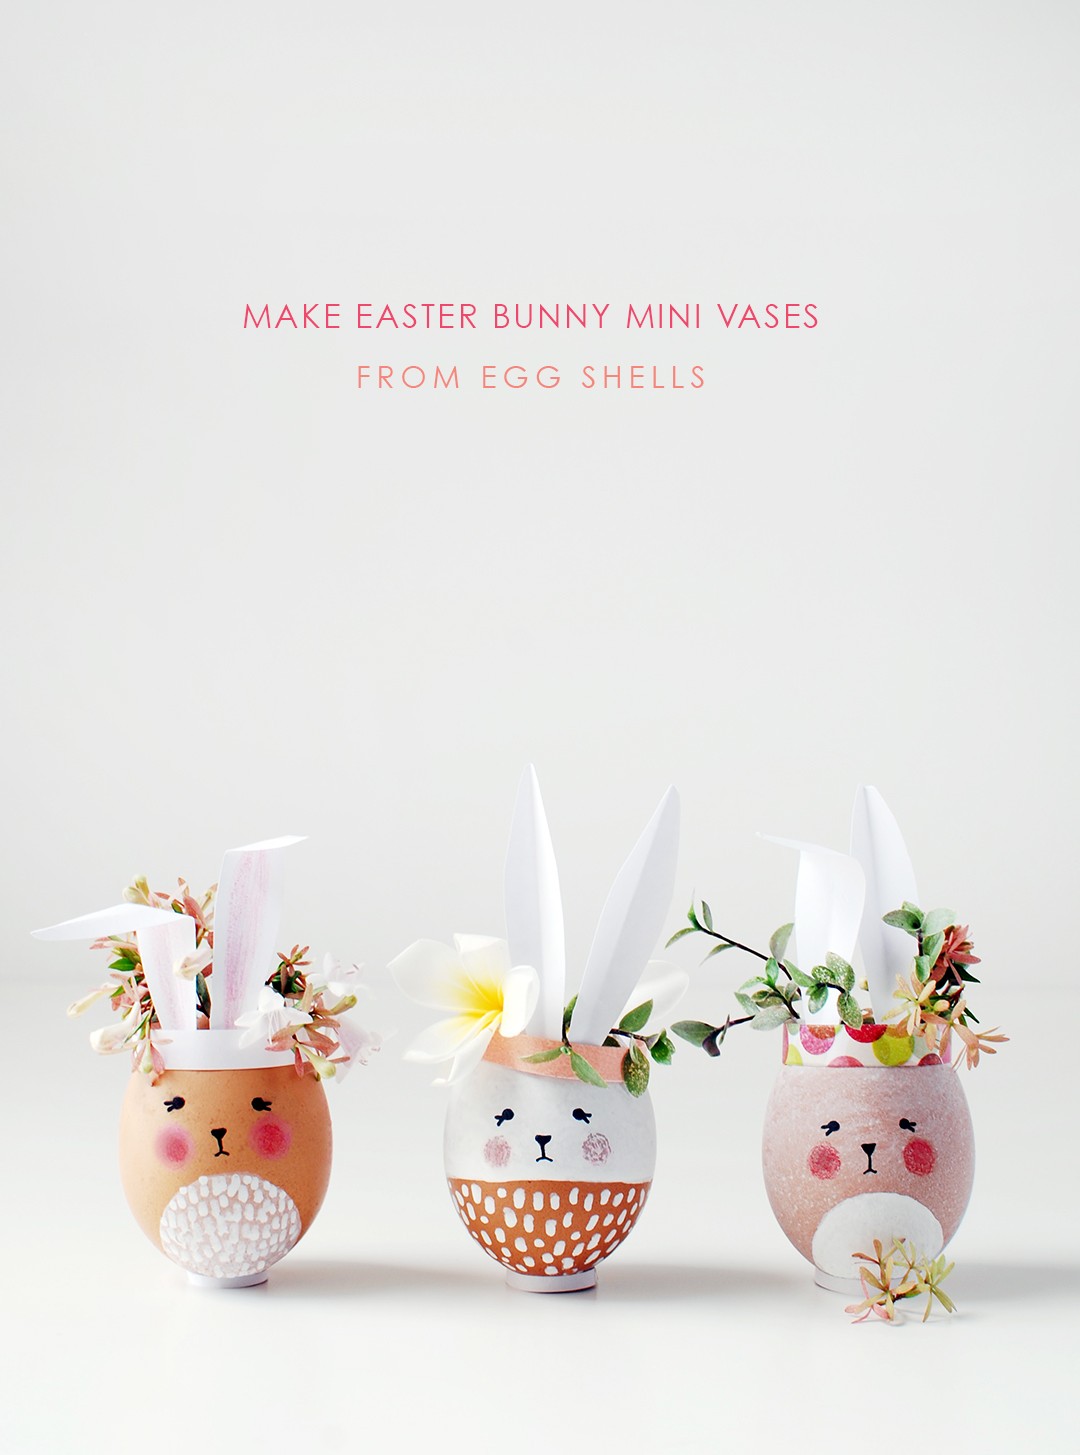 Adorable Easter Bunny Mini Vases